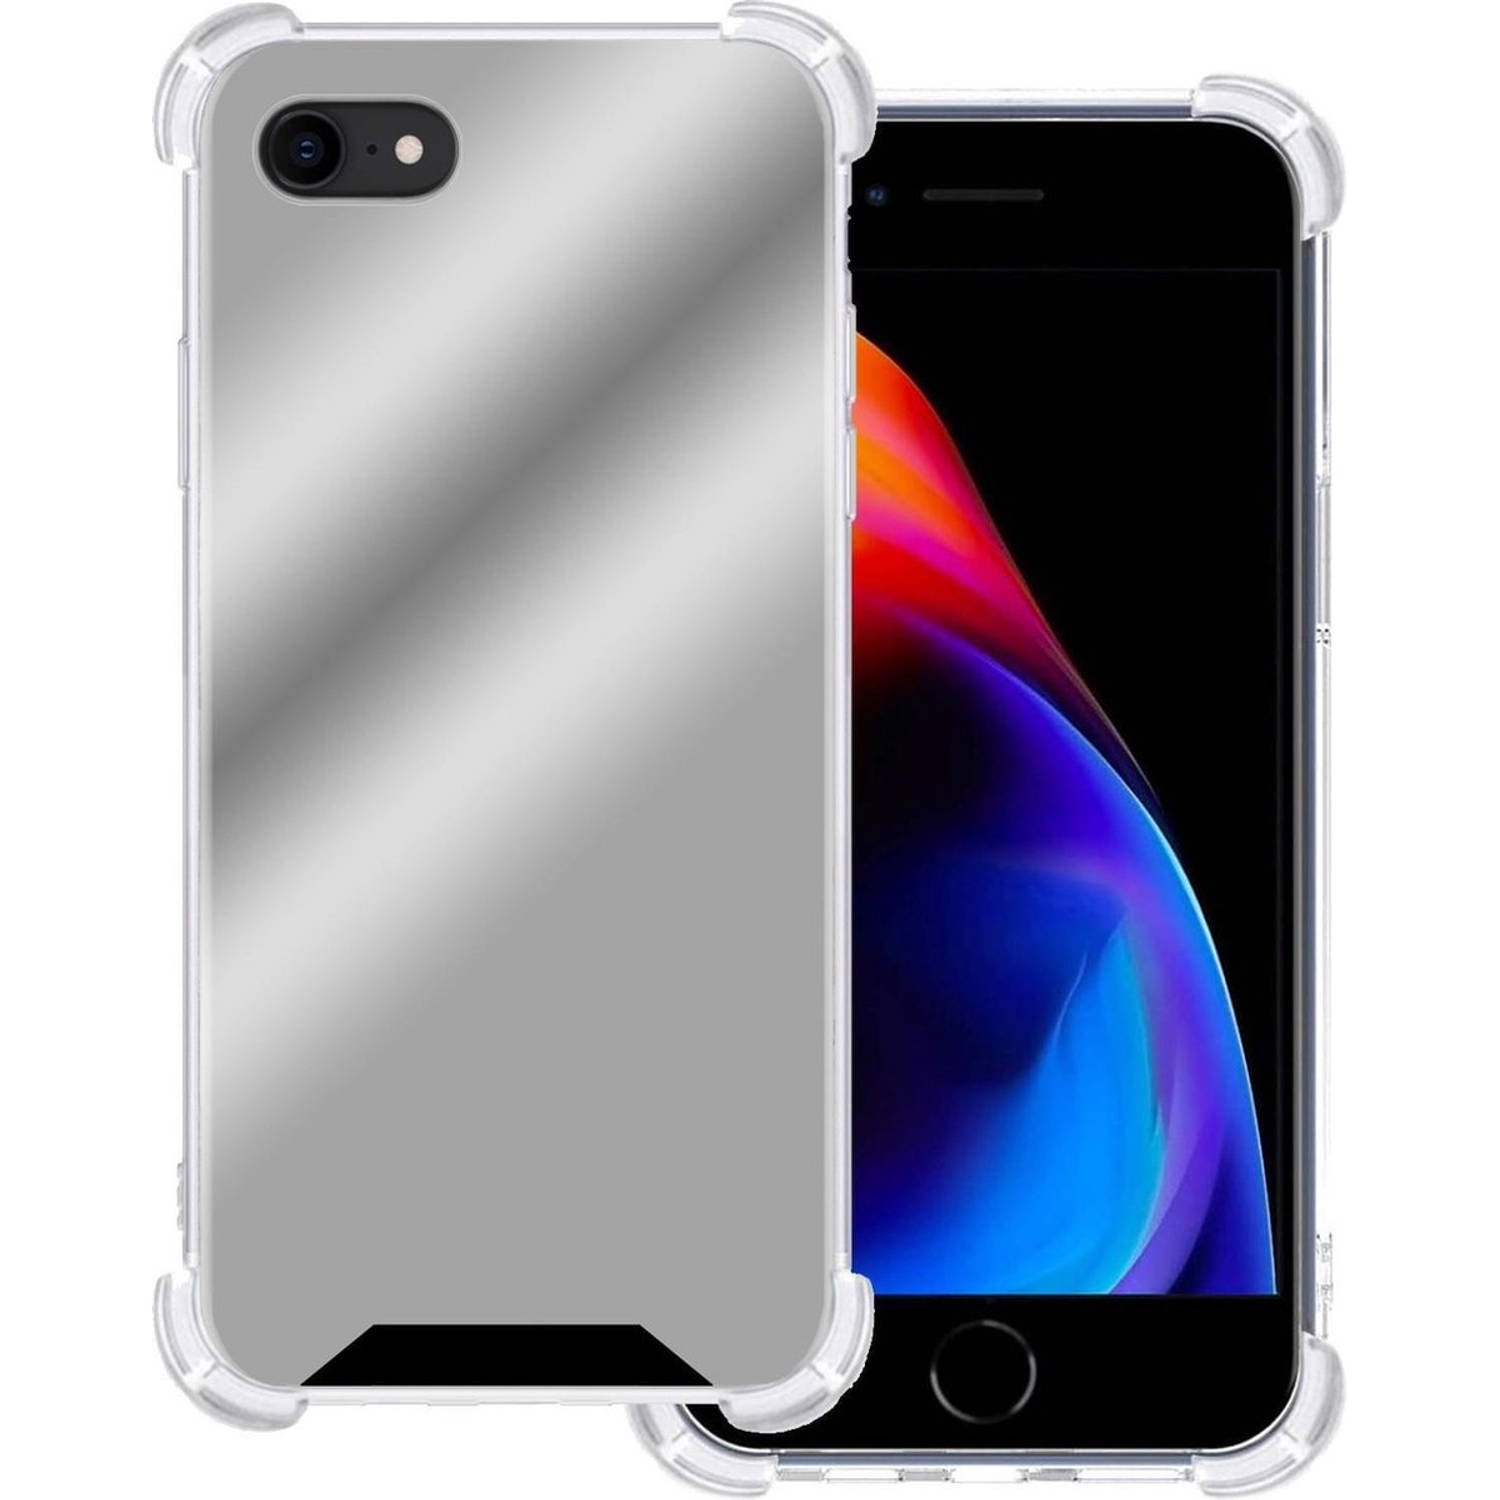 Basey Apple Iphone 8 Hoesje Siliconen Shock Proof Hoes Case Cover Zilver